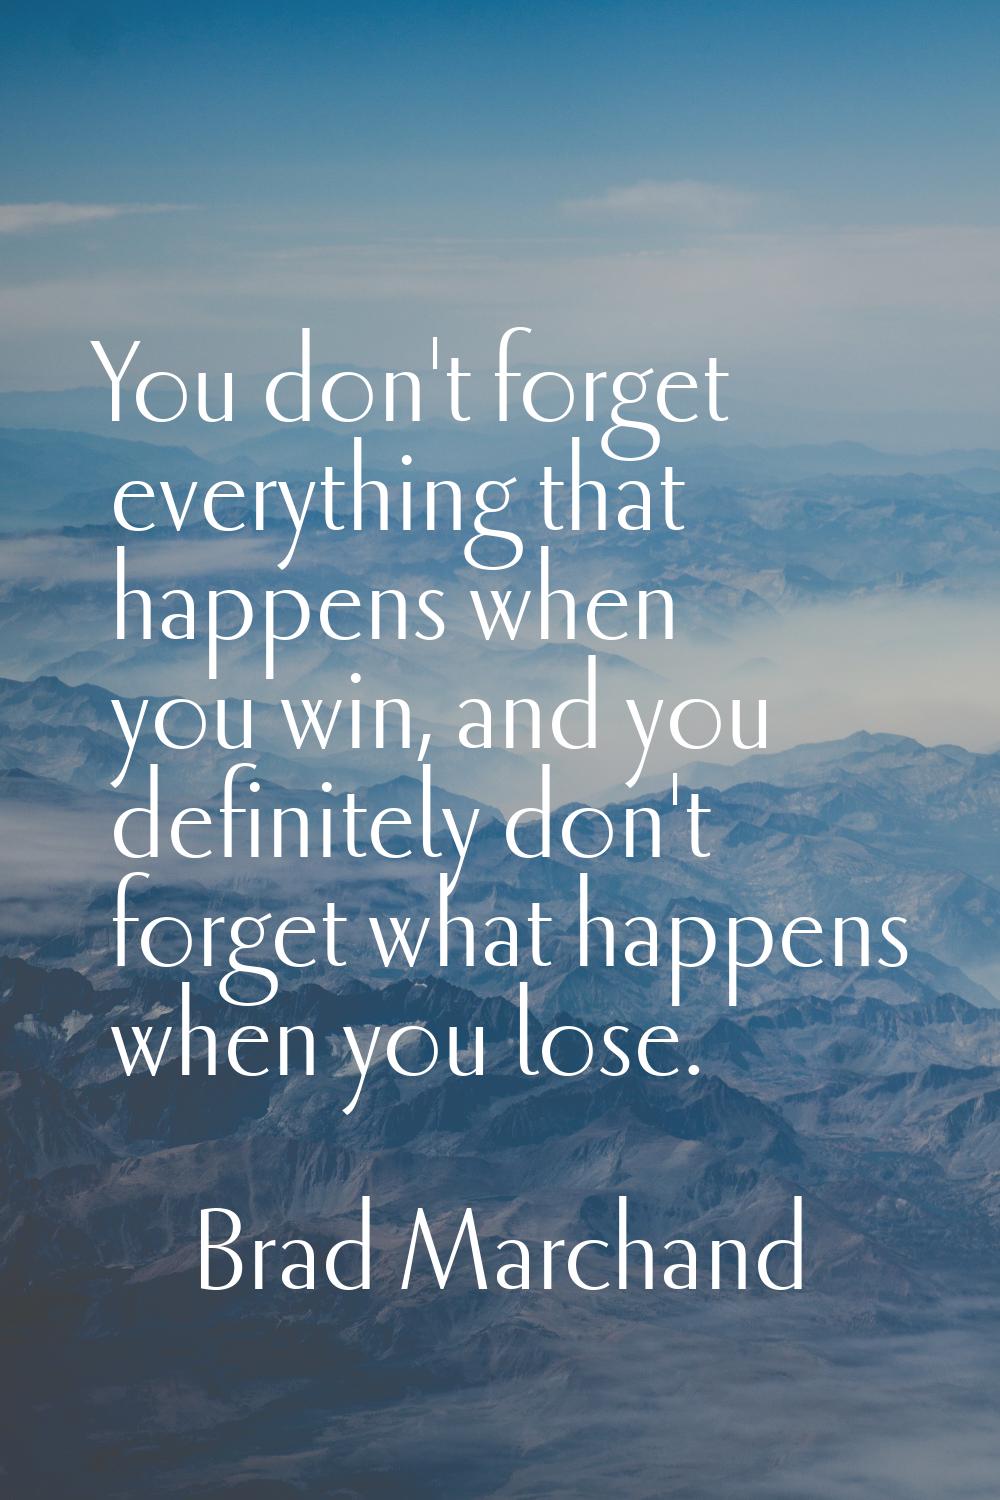 You don't forget everything that happens when you win, and you definitely don't forget what happens